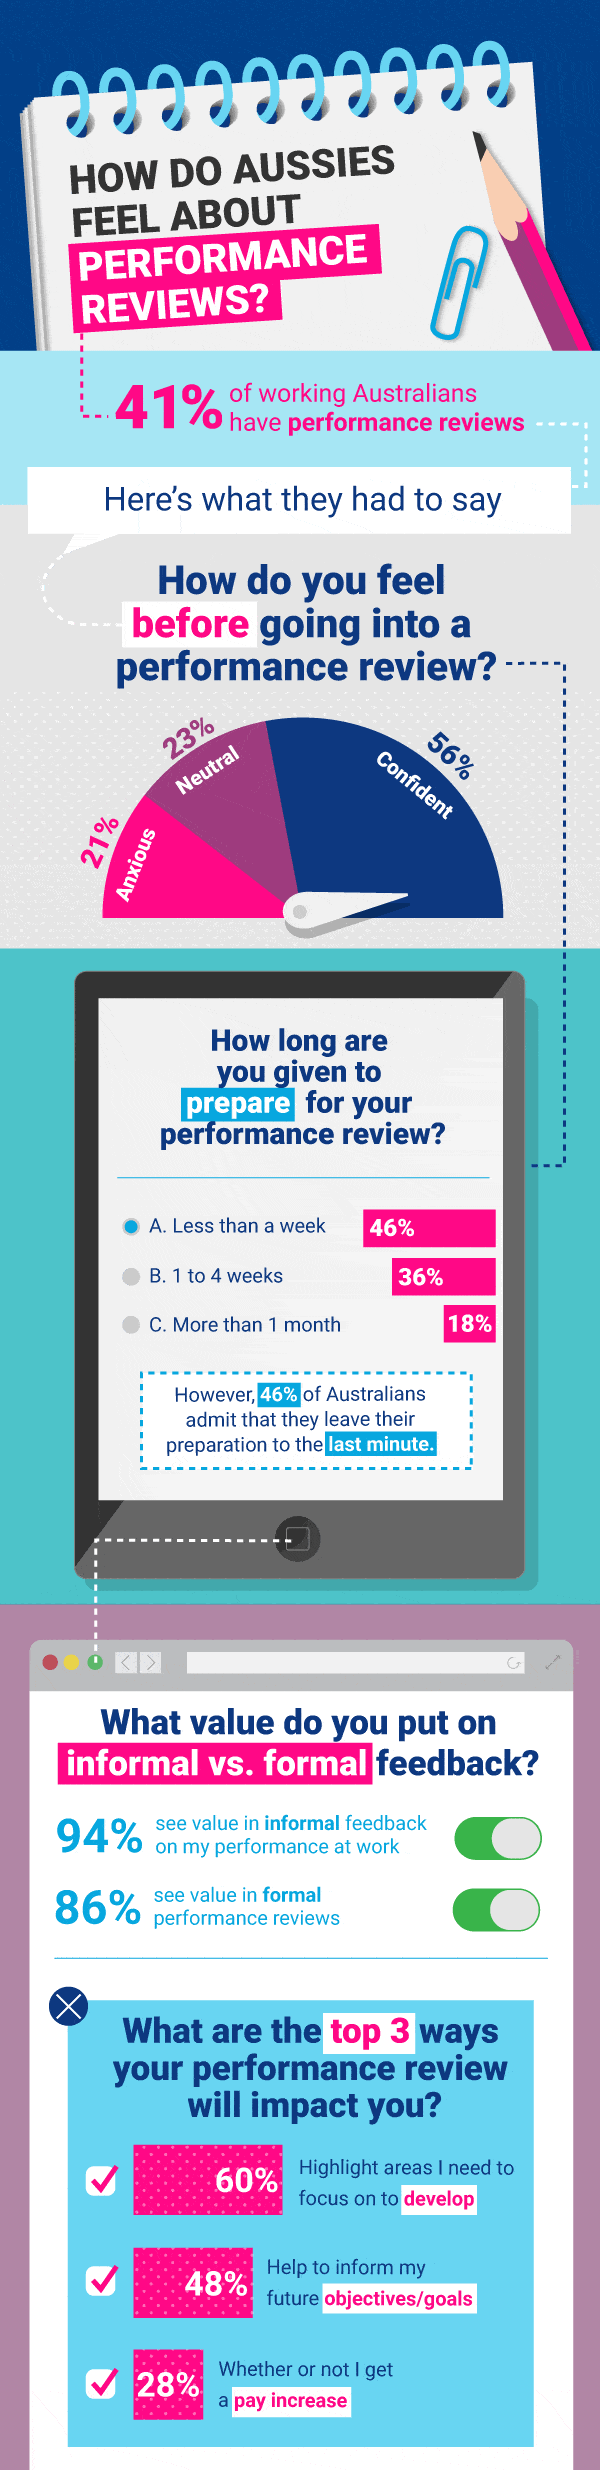 How do Aussies feel about Performance Reviews?